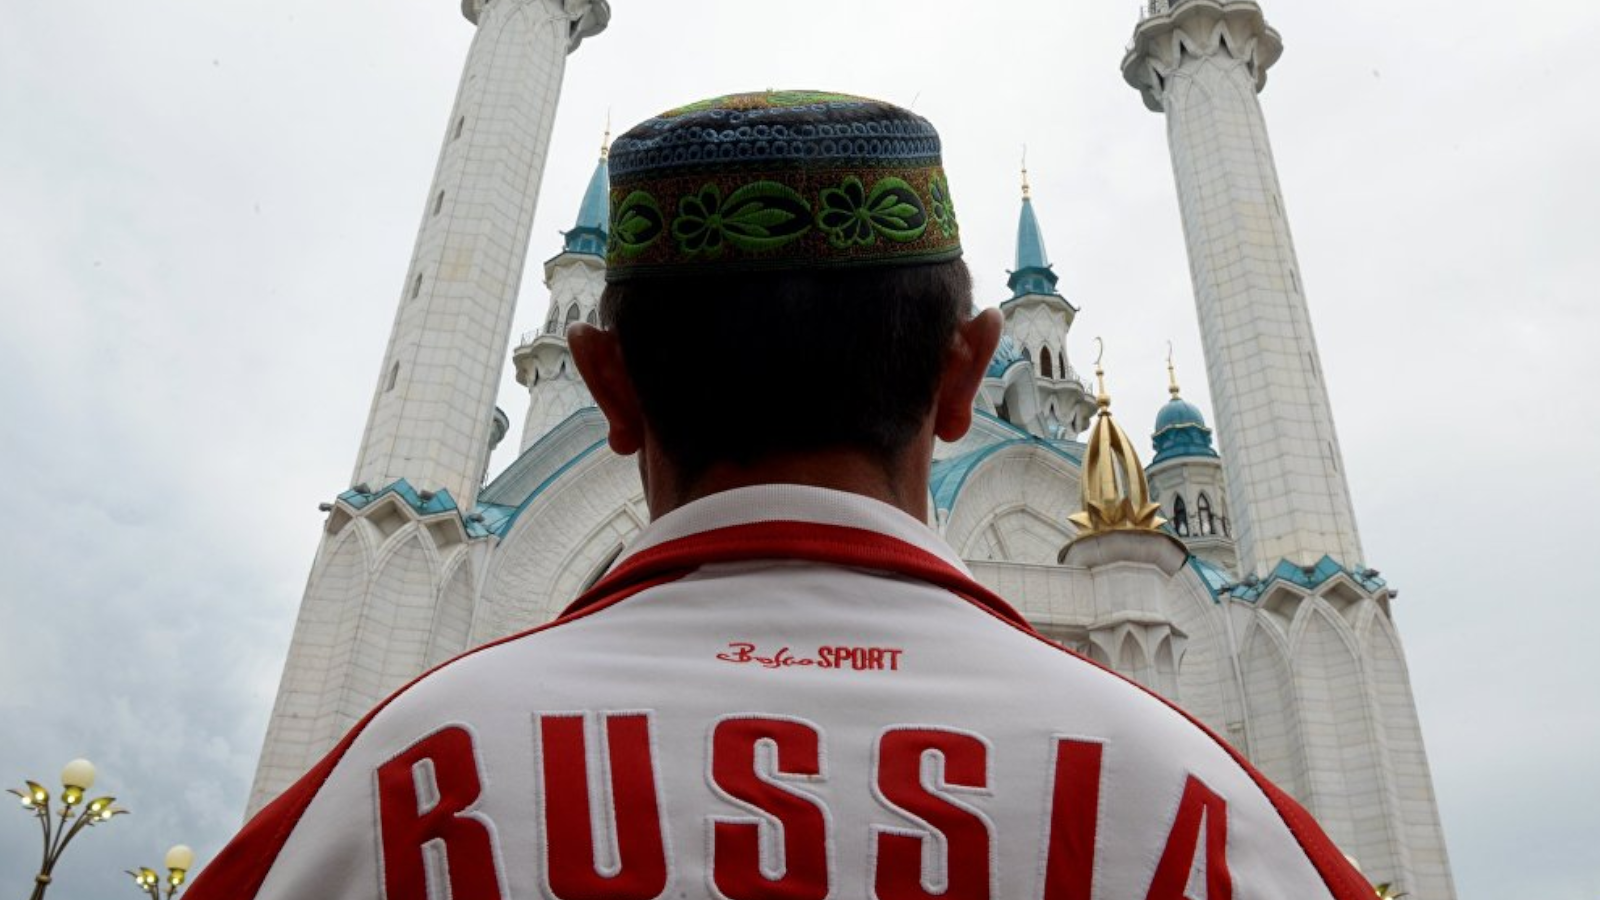 The more you are for the Russian world, the more you are a Muslim